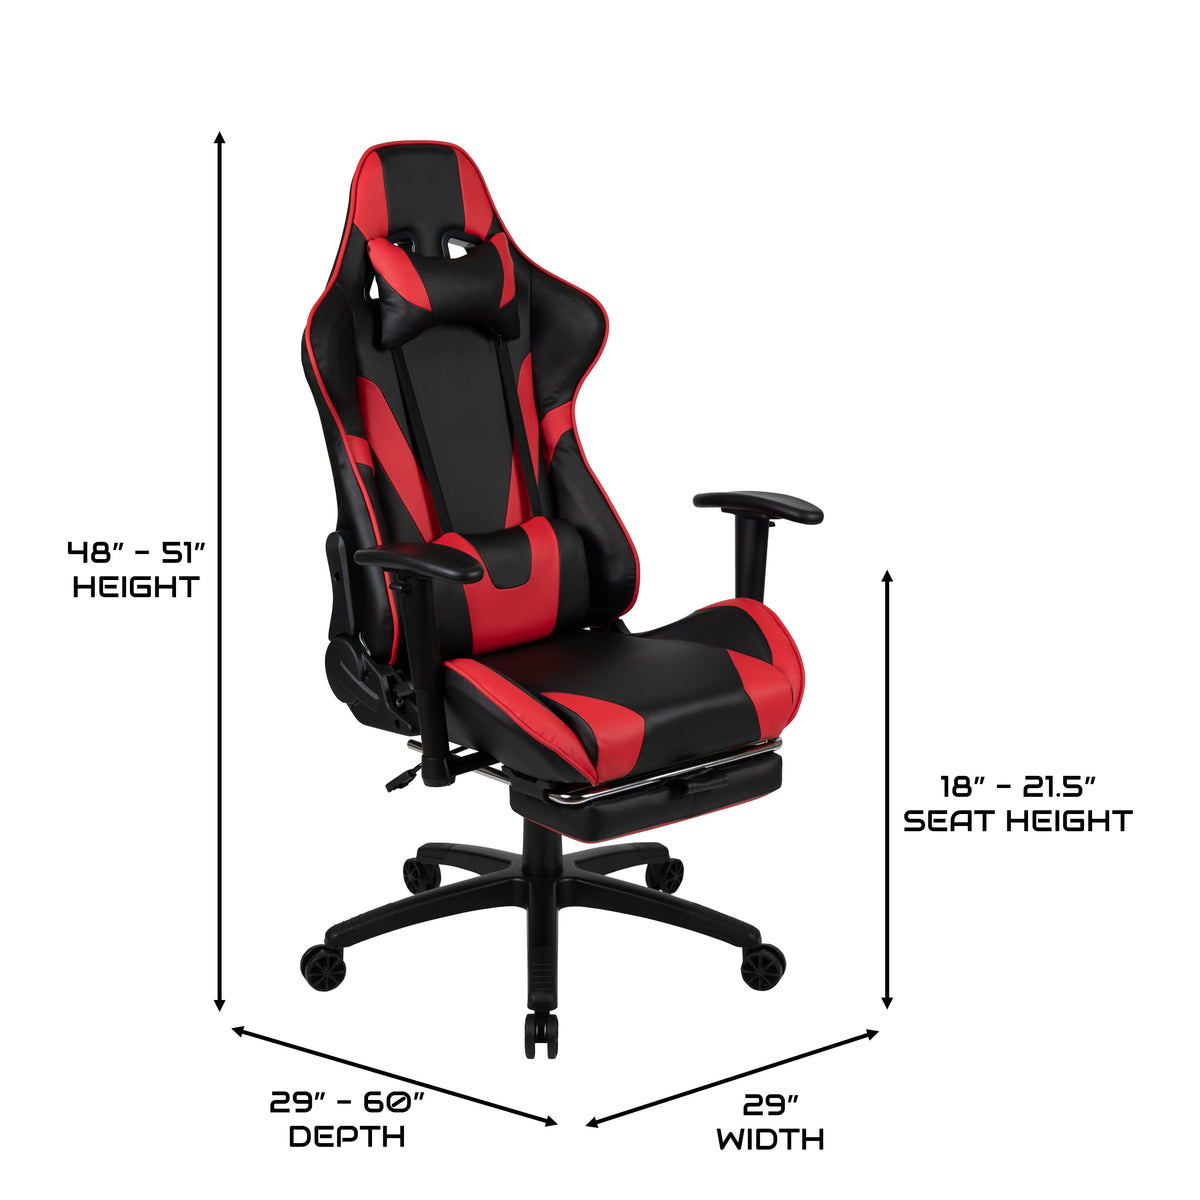 Red |#| Reclining Faux Leather Gaming Chair - Adjustable Arms & Footrest - Black & Red